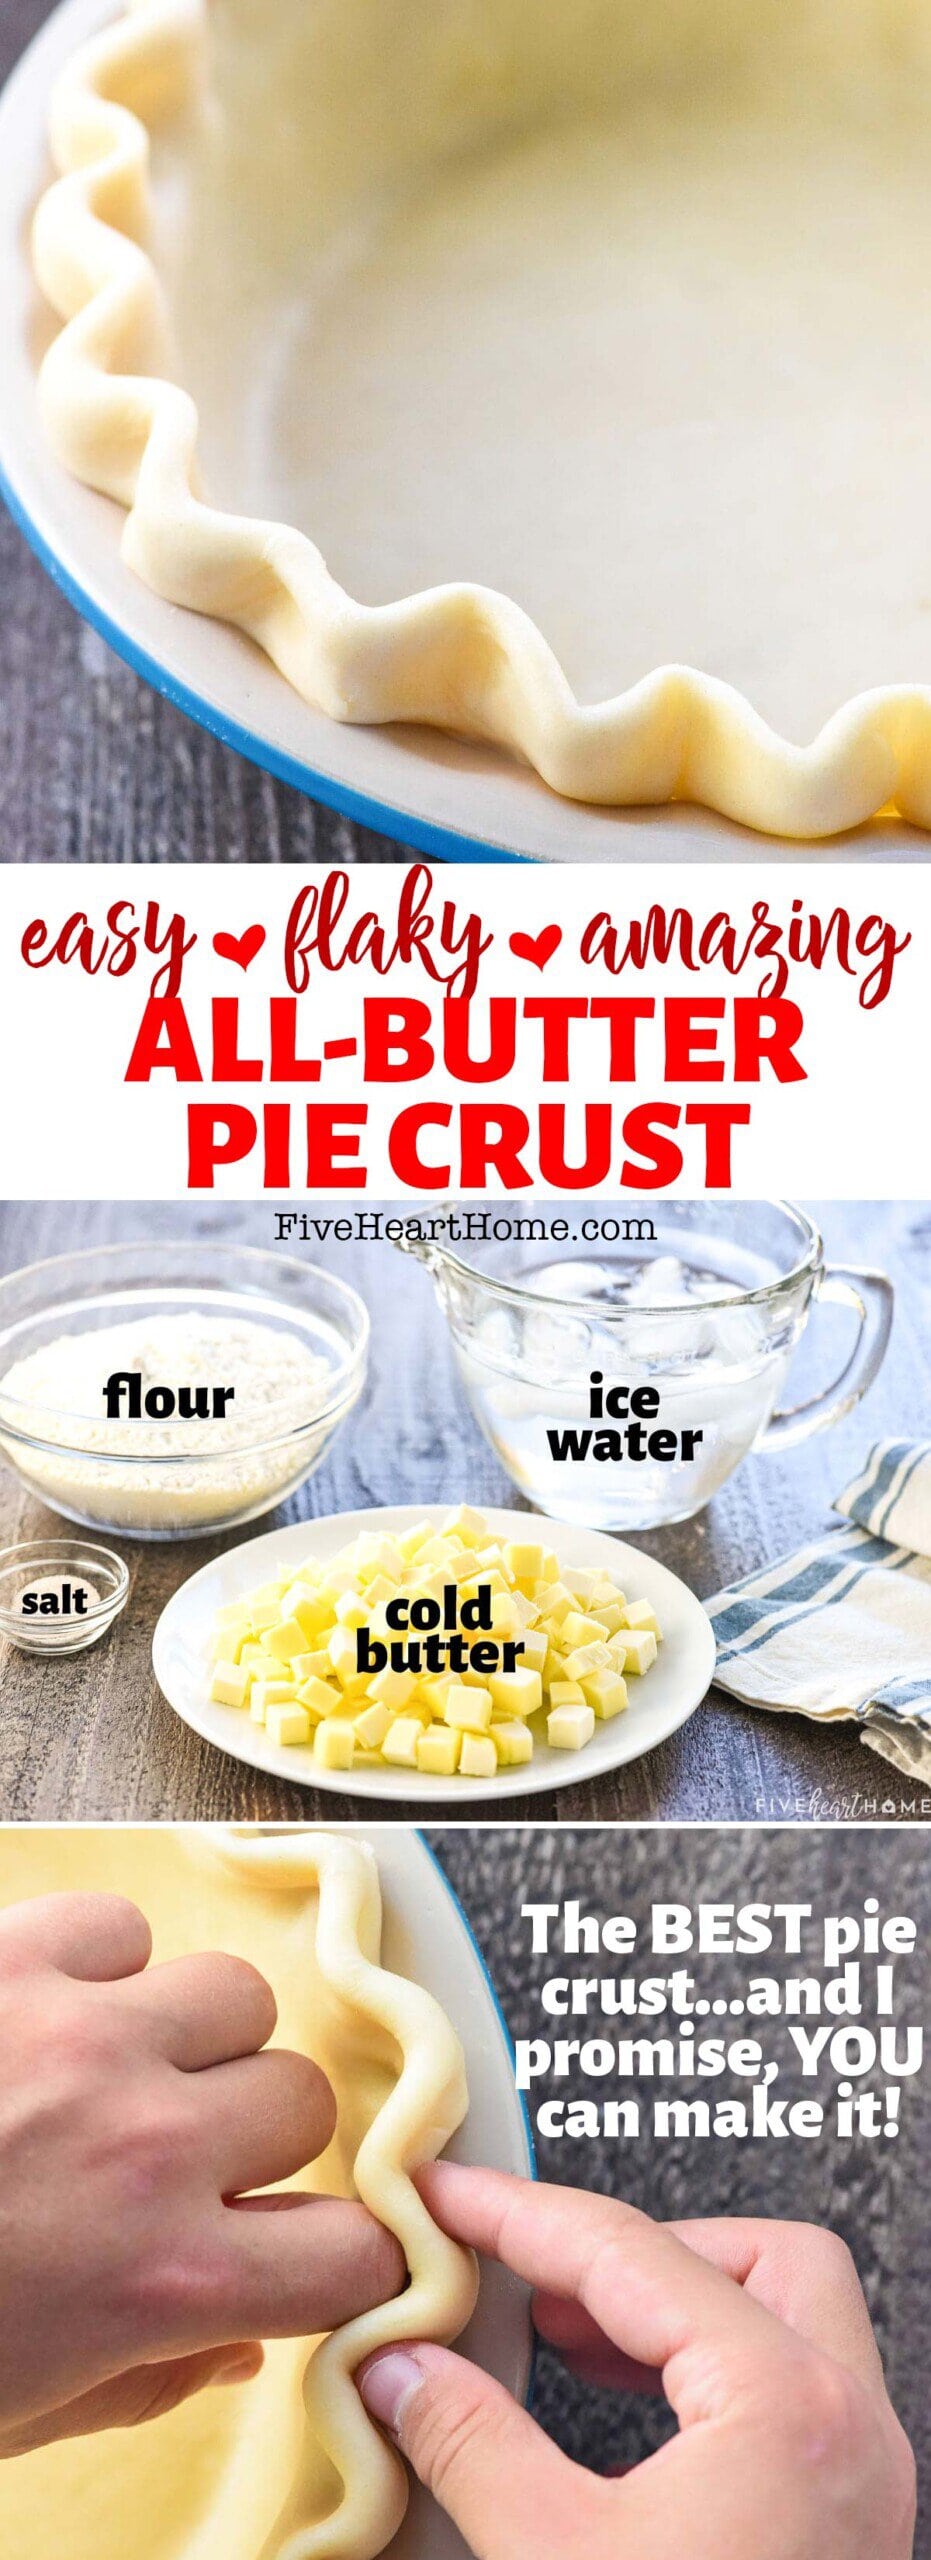 Butter Pie Crust ~ this recipe is homemade, easy to make with just four simple ingredients, and amazingly flaky and delicious! It’s truly foolproof (even if you’re not already a pie crust expert) and the ONLY pie crust recipe you’ll ever need…hundreds of rave reviews can’t be wrong! | FiveHeartHome.com via @fivehearthome